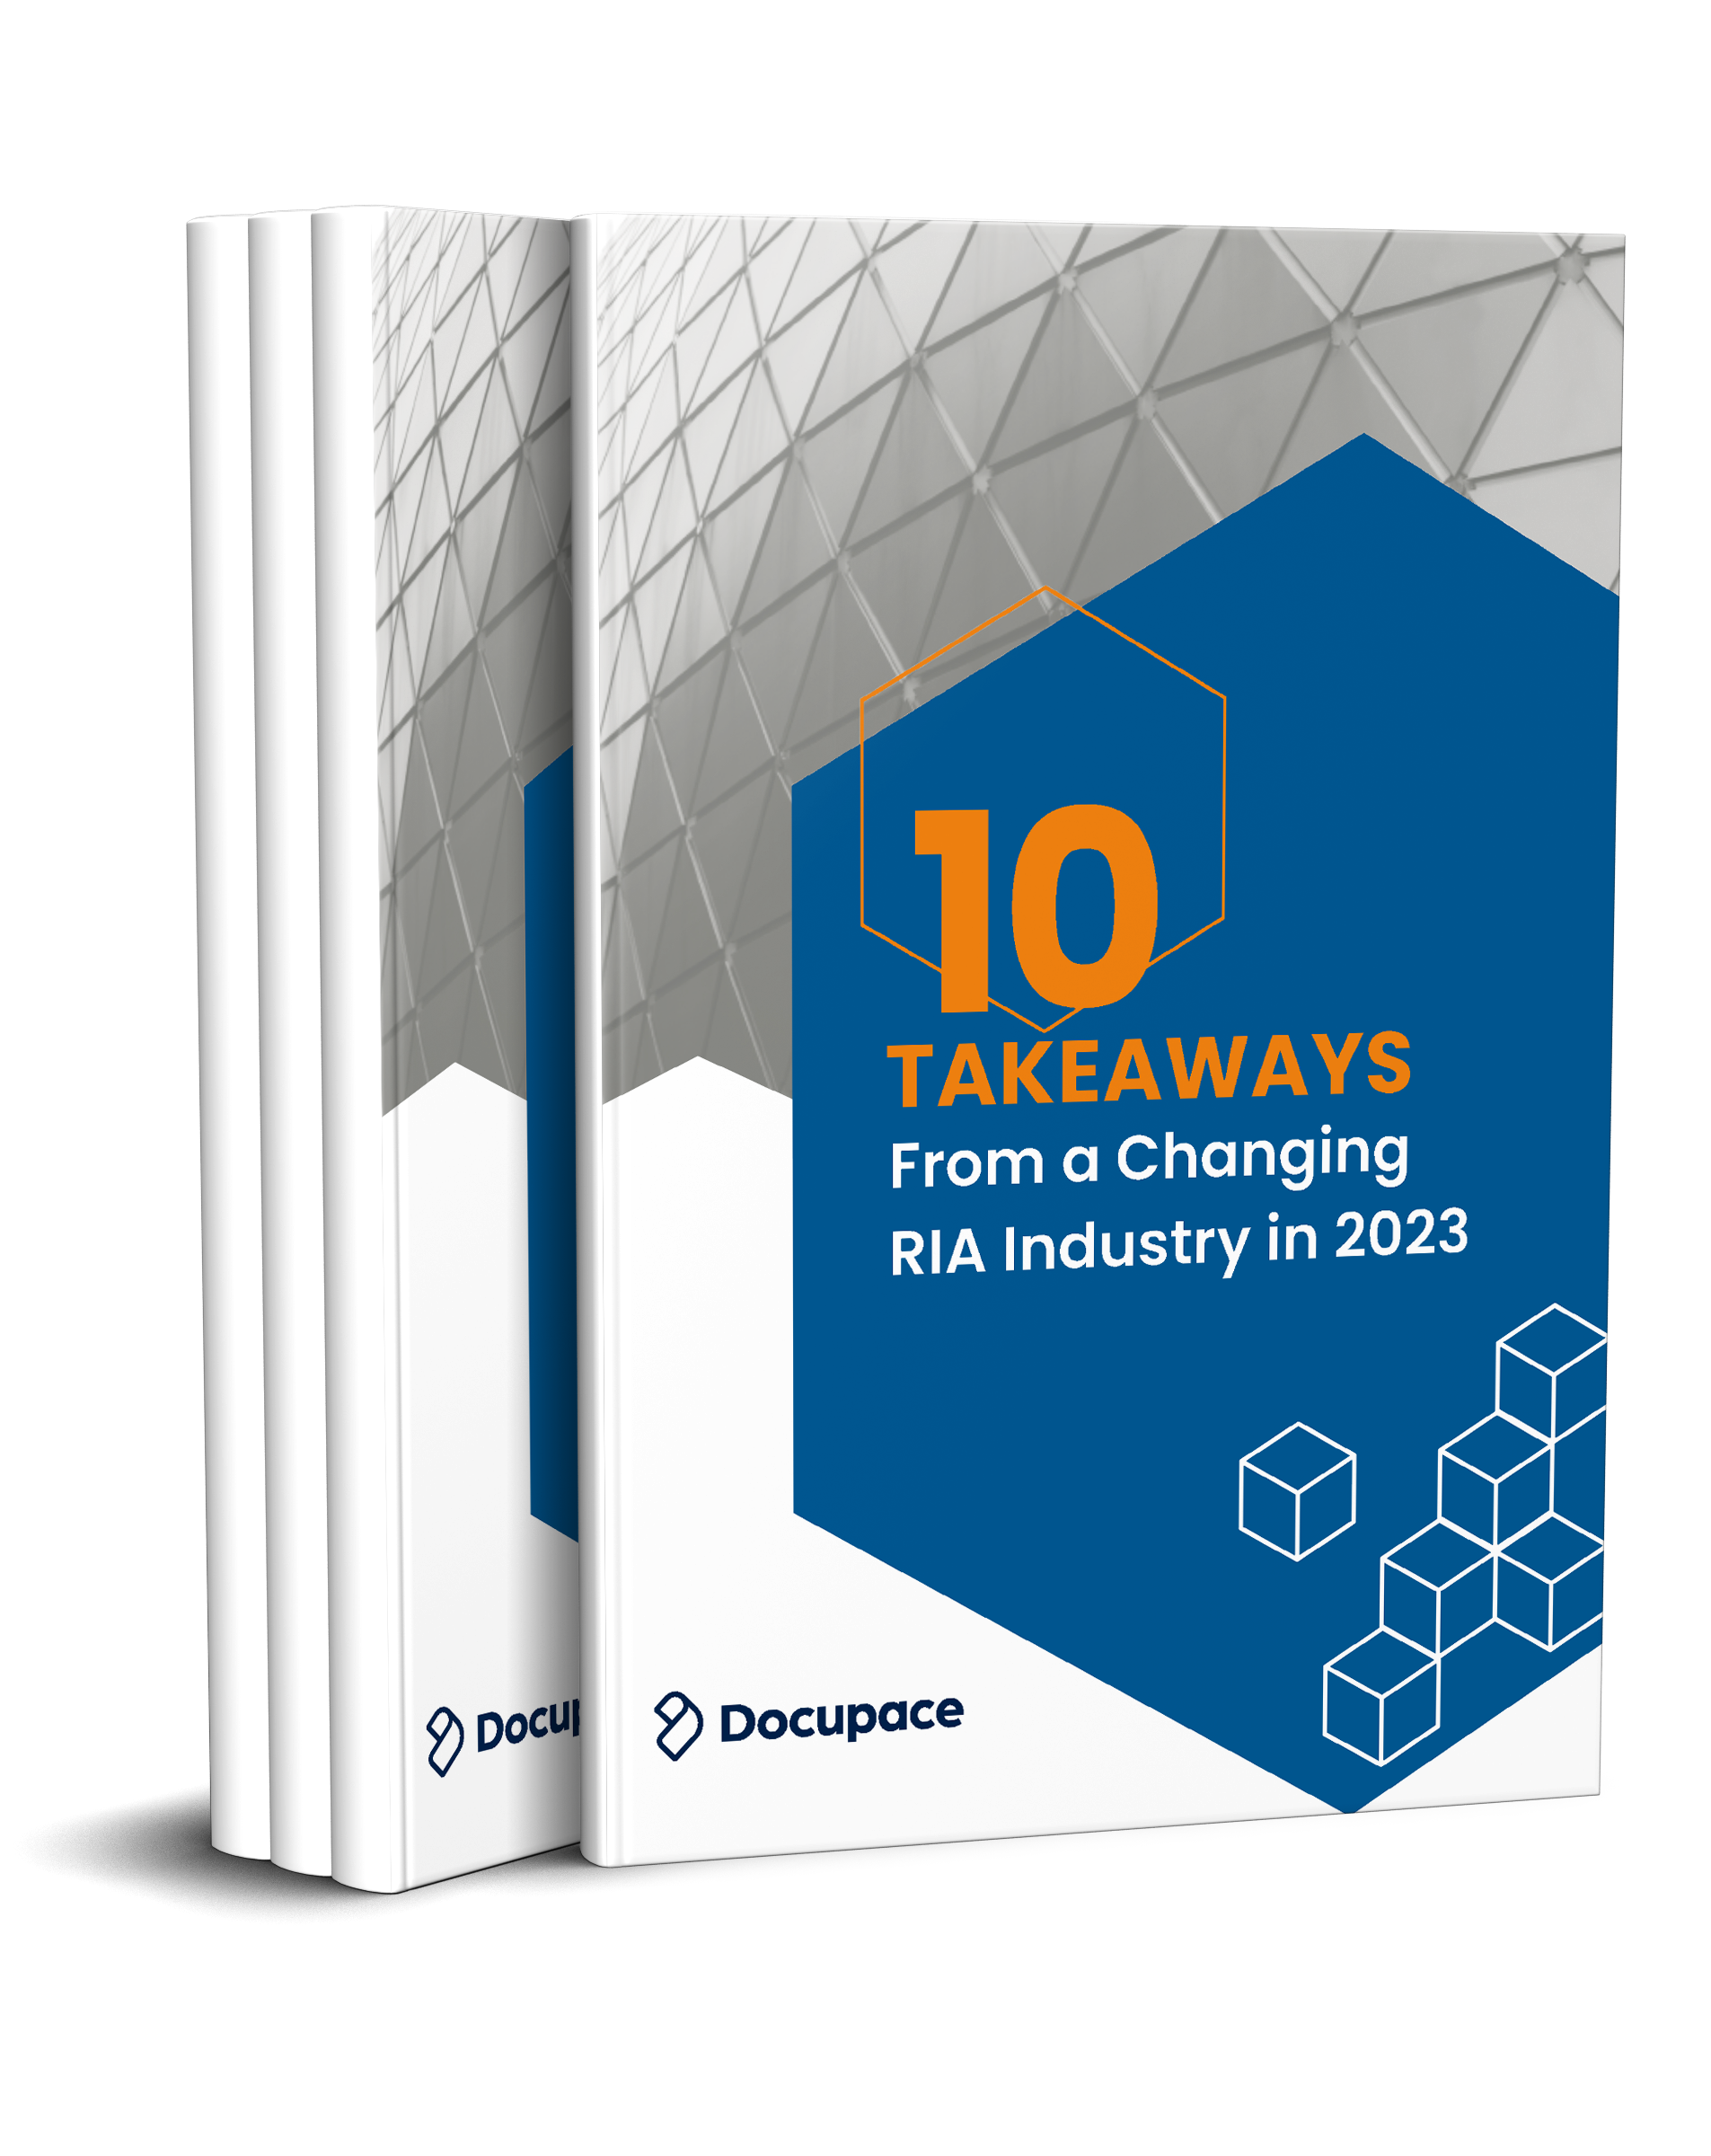 10 Takeaways from a Changing RIA Industry